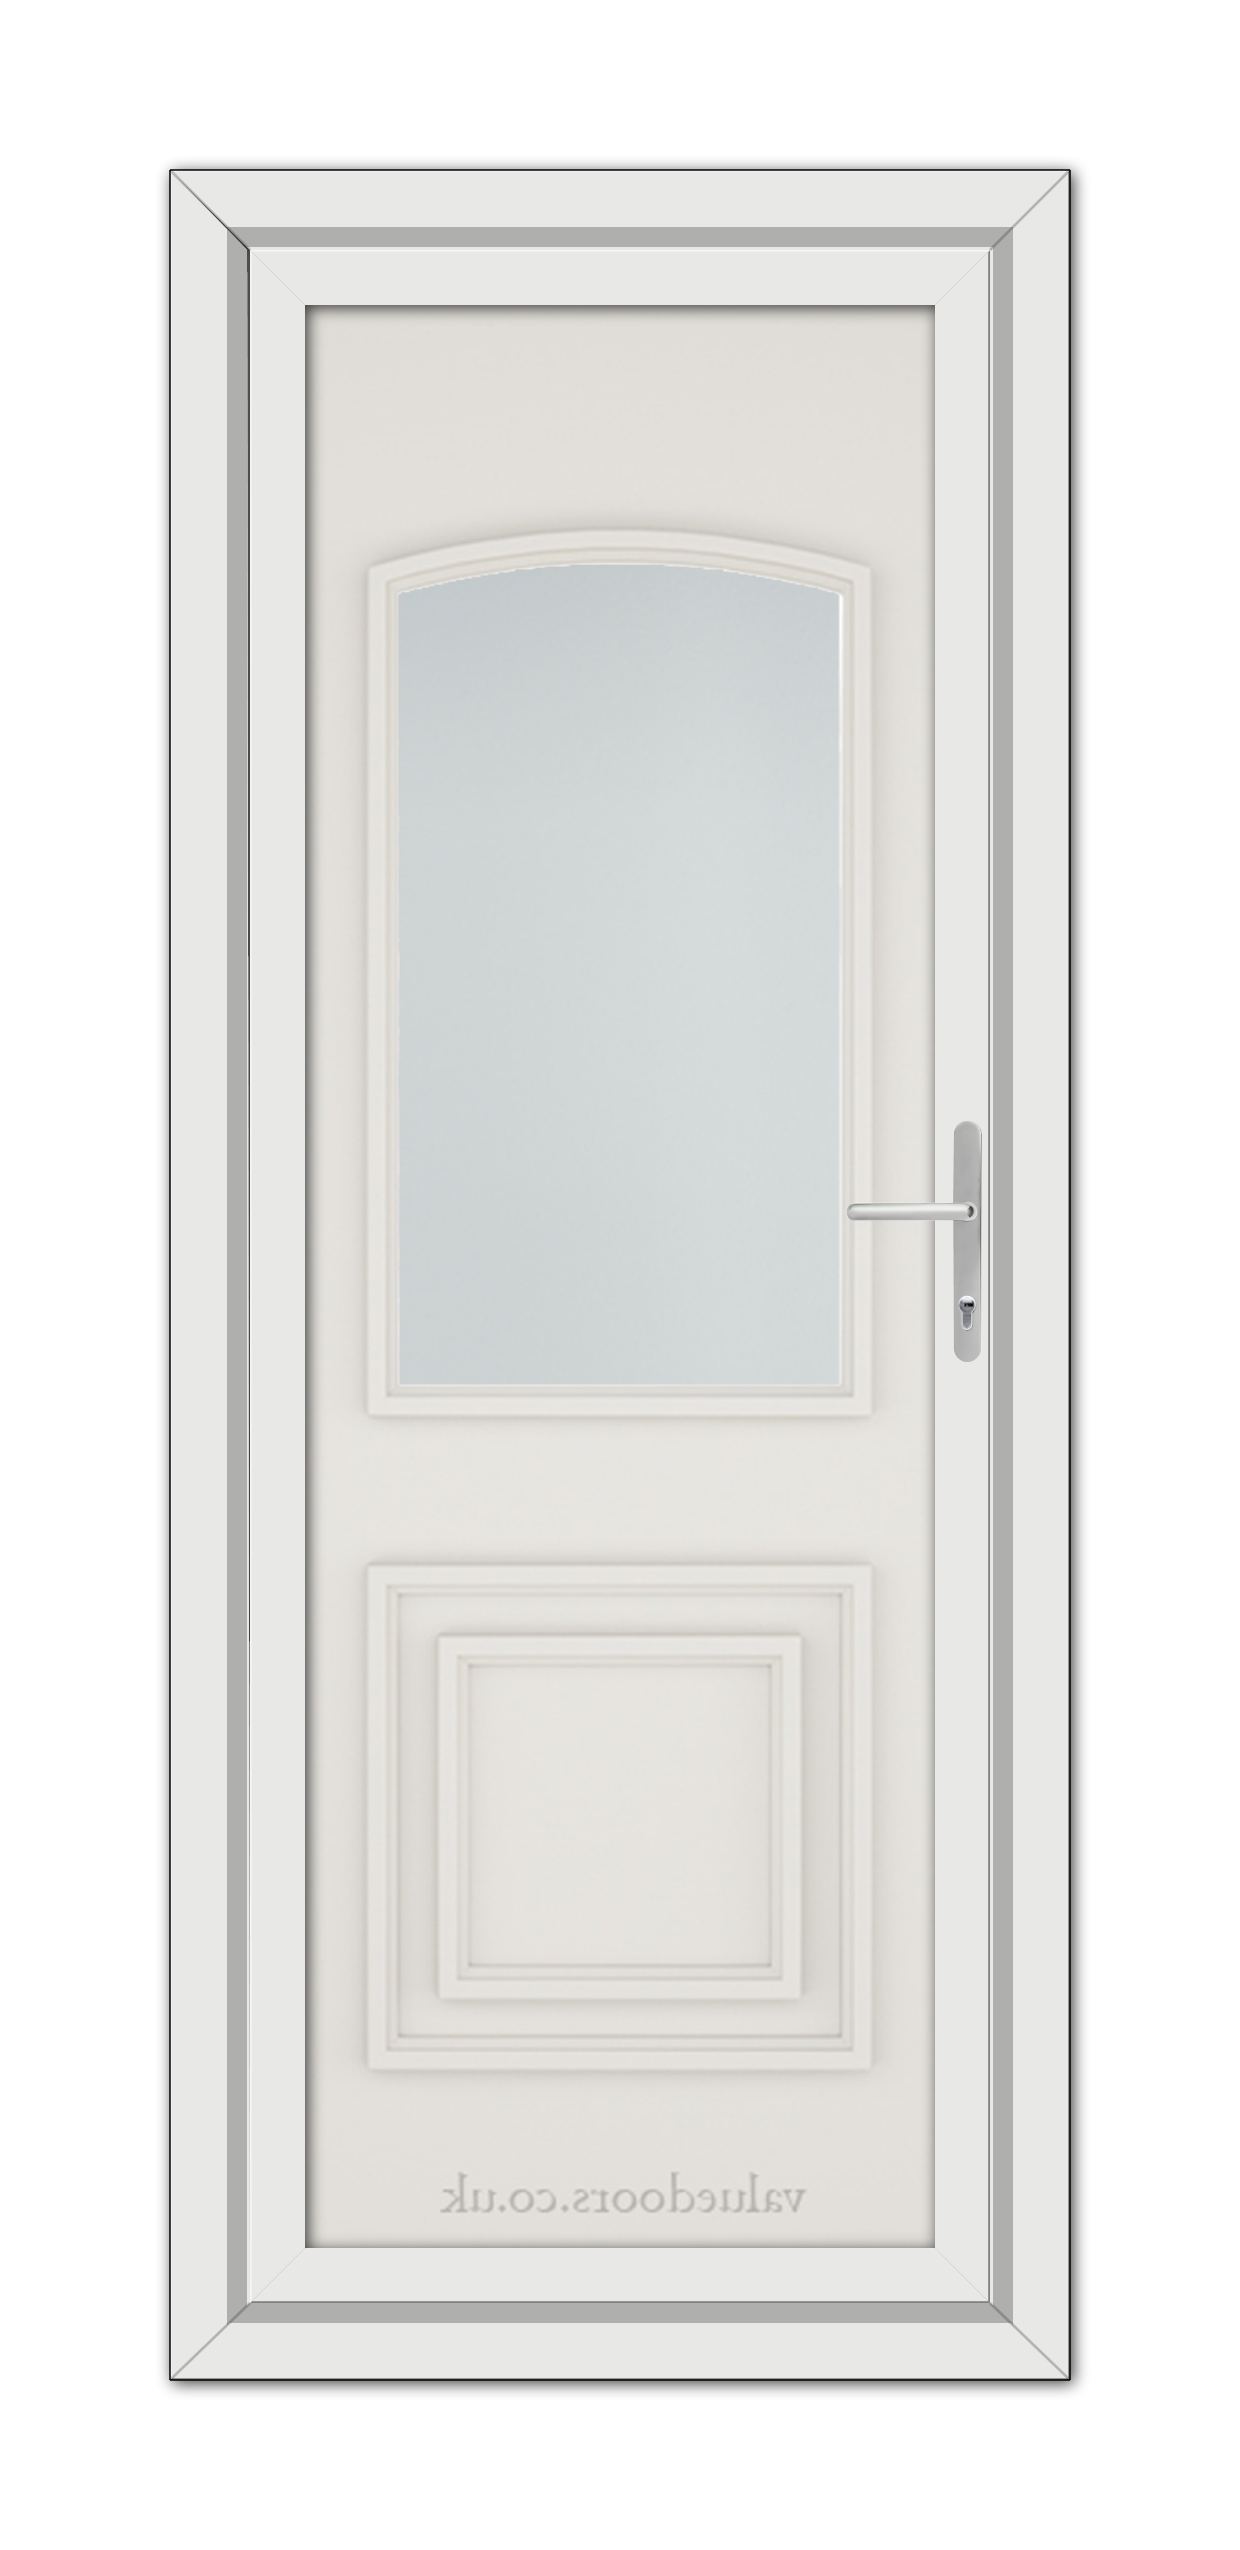 A White Cream Balmoral Classic uPVC Door with a glass panel.